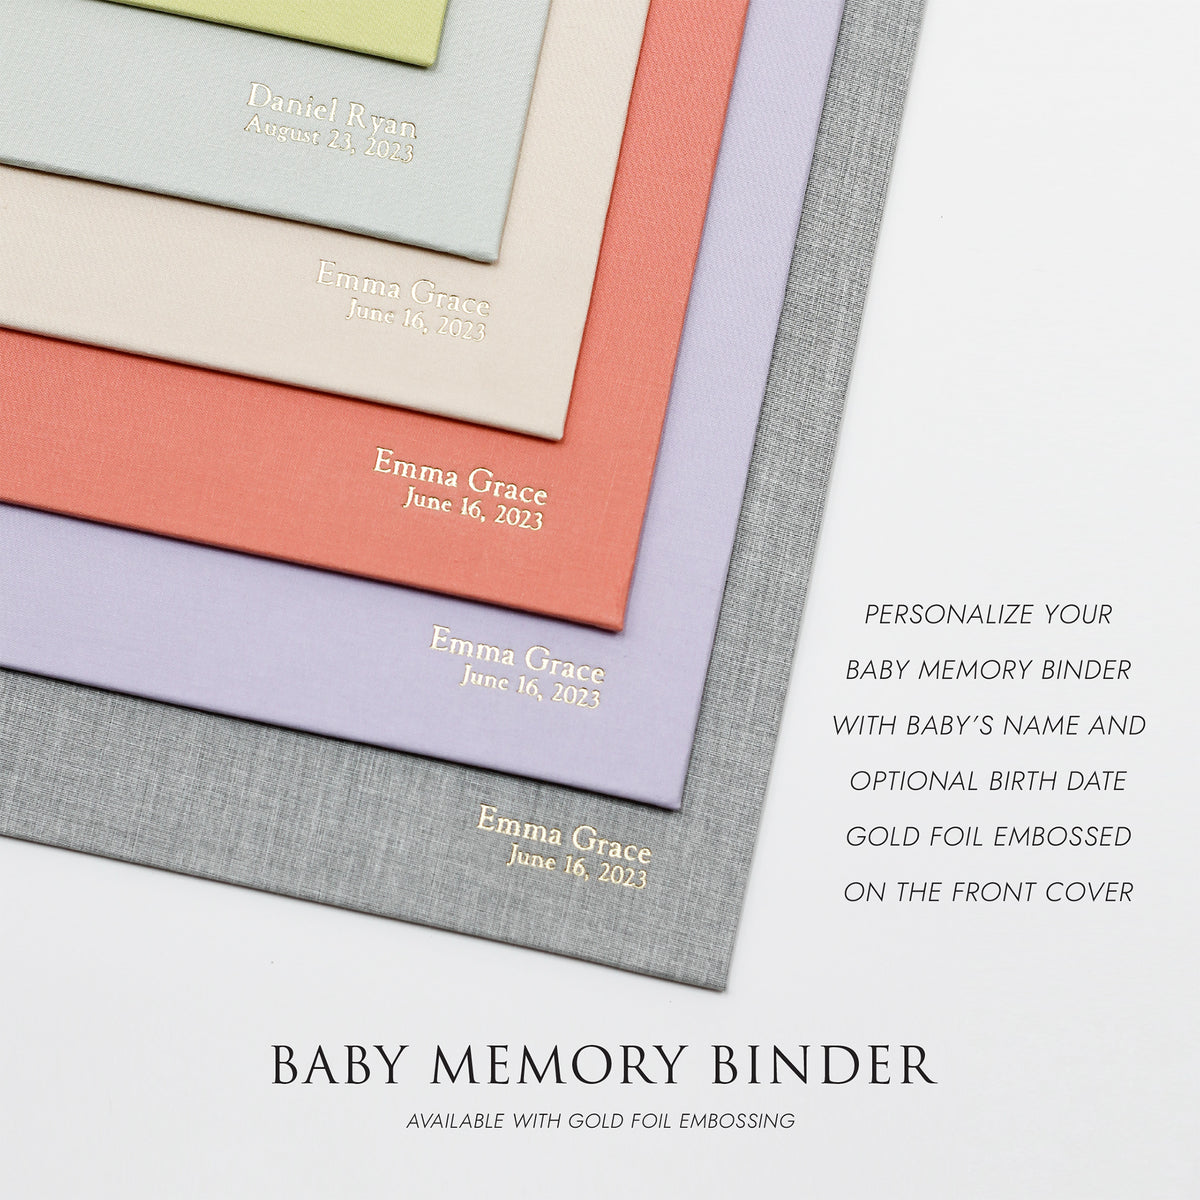 Personalized Baby Memory Binder with Ballet Pink Cover | Select Your Own Pages